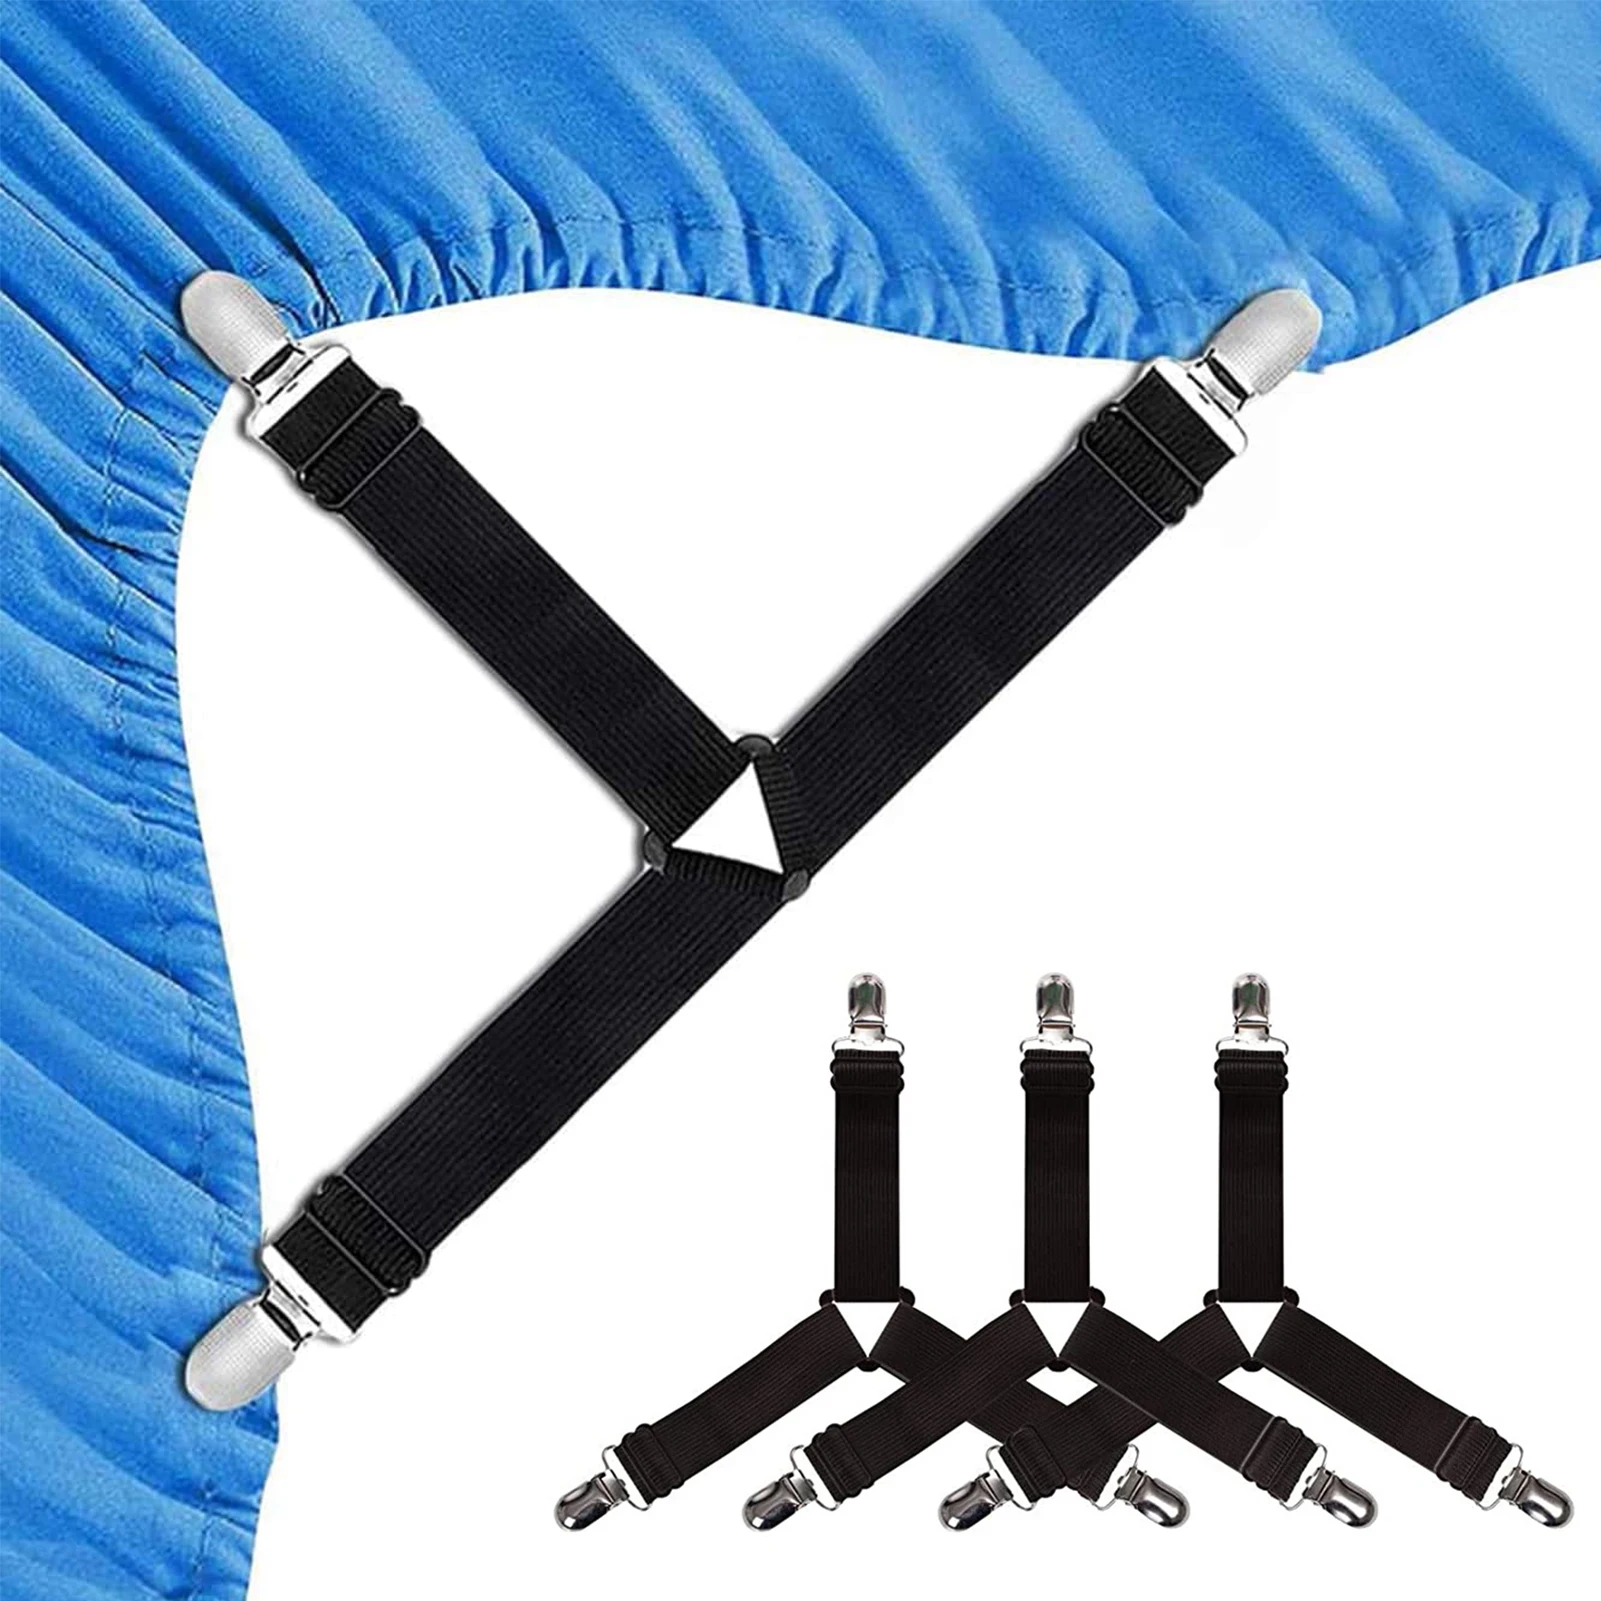 

4 Pcs Adjustable Mattress Gripper Clips Triangle Bed Sheet Holders Fitted Sheet Clips Sheet Suspenders Bed Mattress Cover Clips